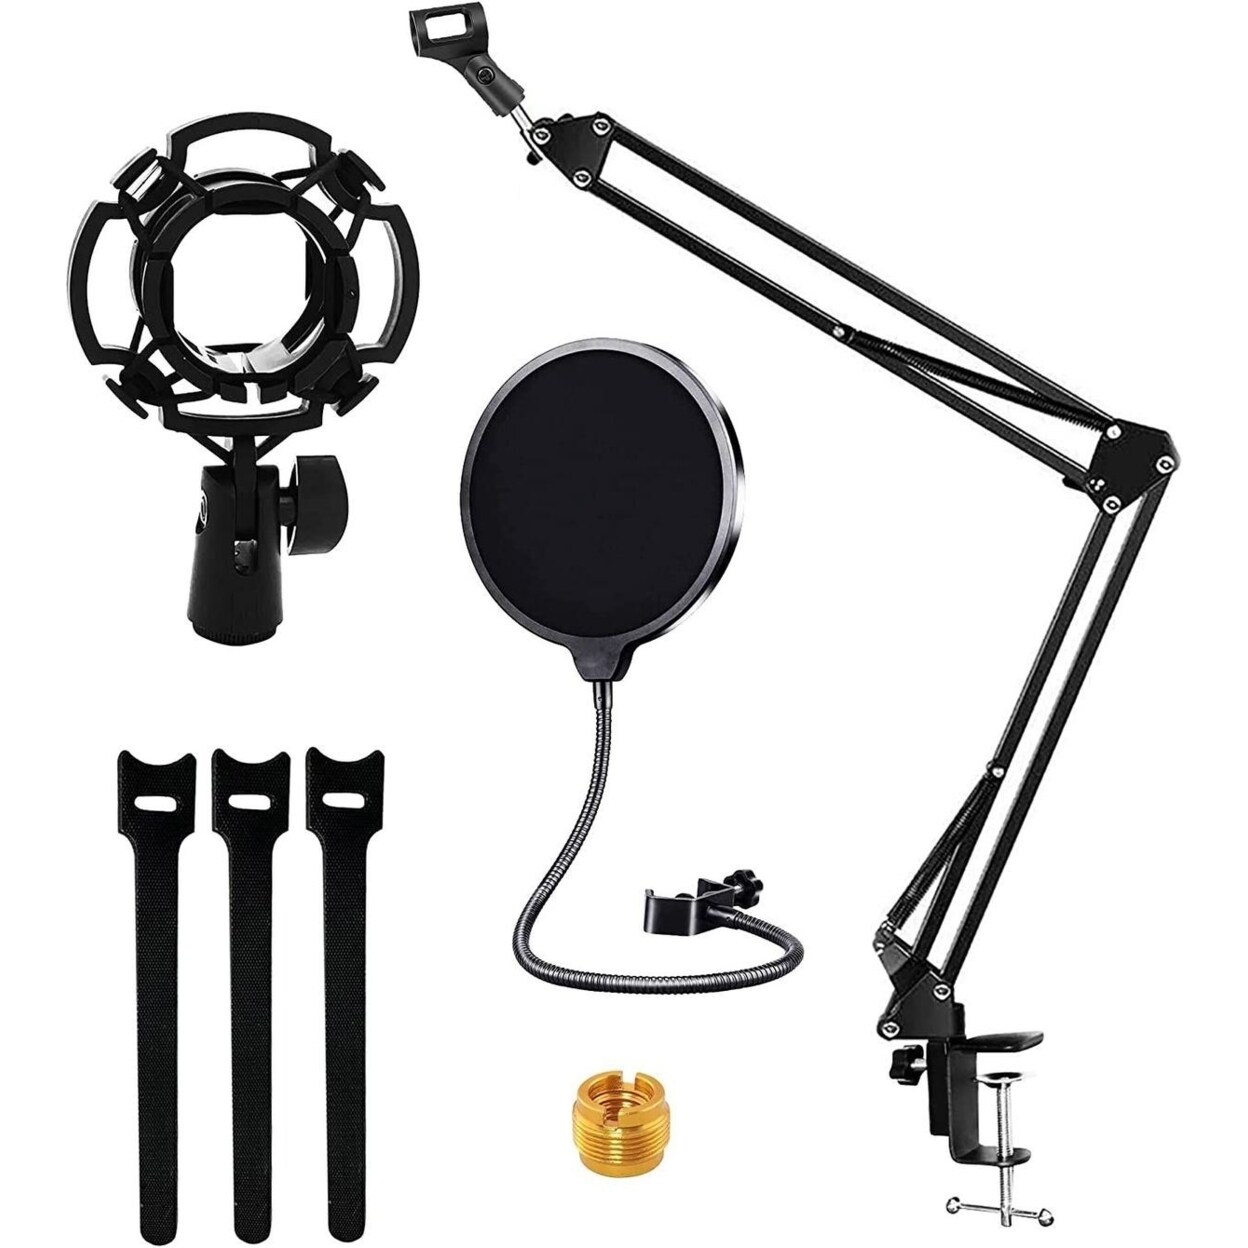 SKUSHOPS Professional Microphone Stand 16 inch with Pop Filter Heavy Duty Microphone Suspension Scissor Arm Stand and Windscreen